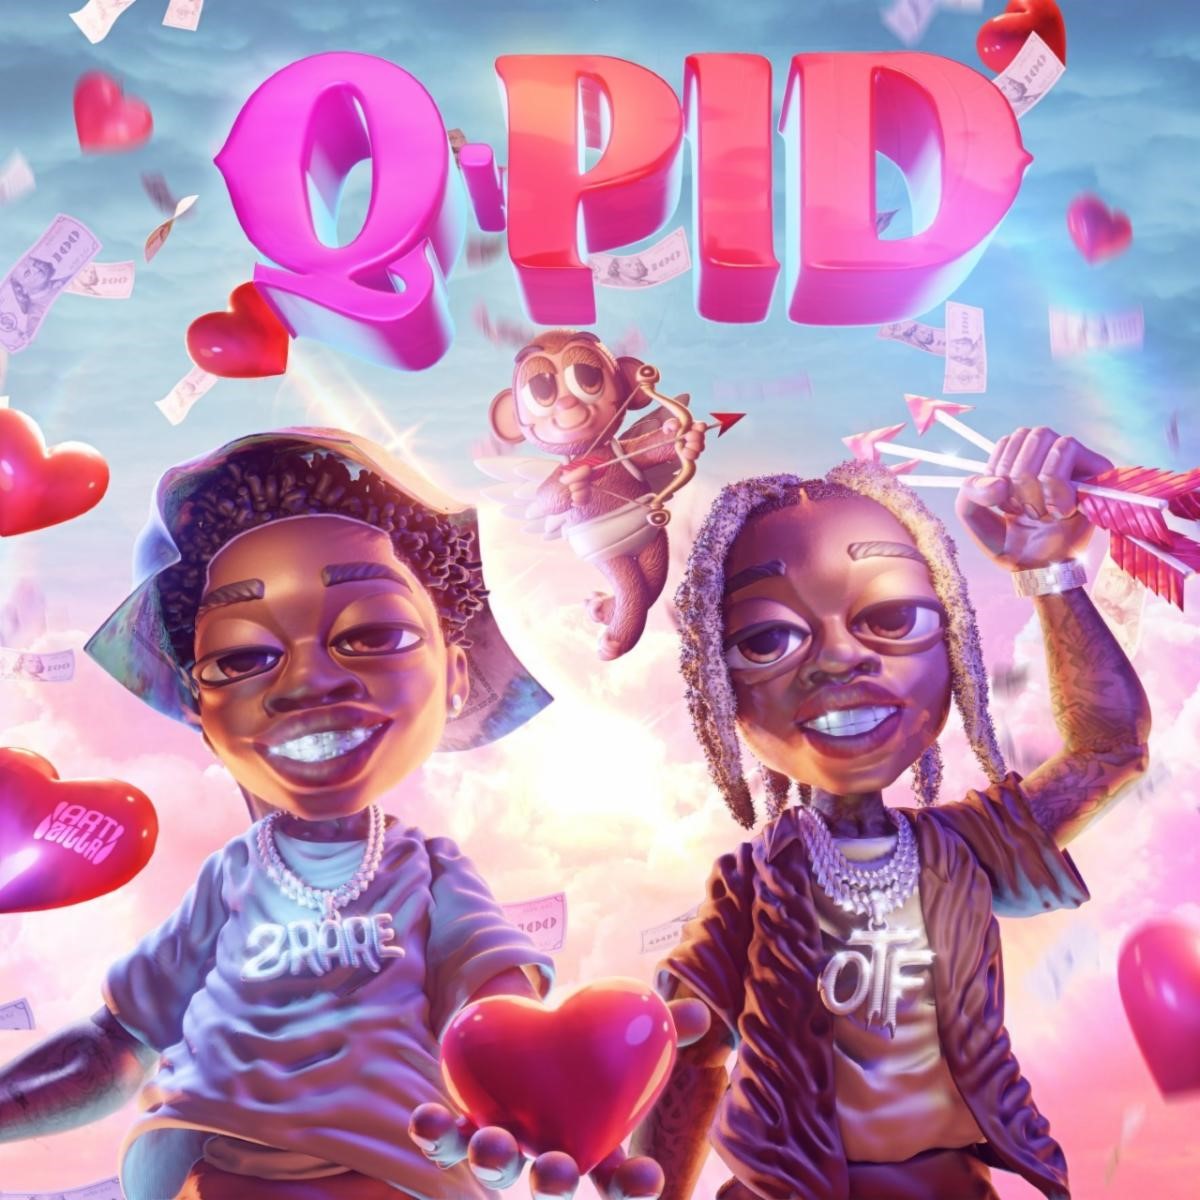 2Rare Enlists Lil Durk For Breakout Viral Hit “Q-Pid”, Yours Truly, News, June 10, 2023